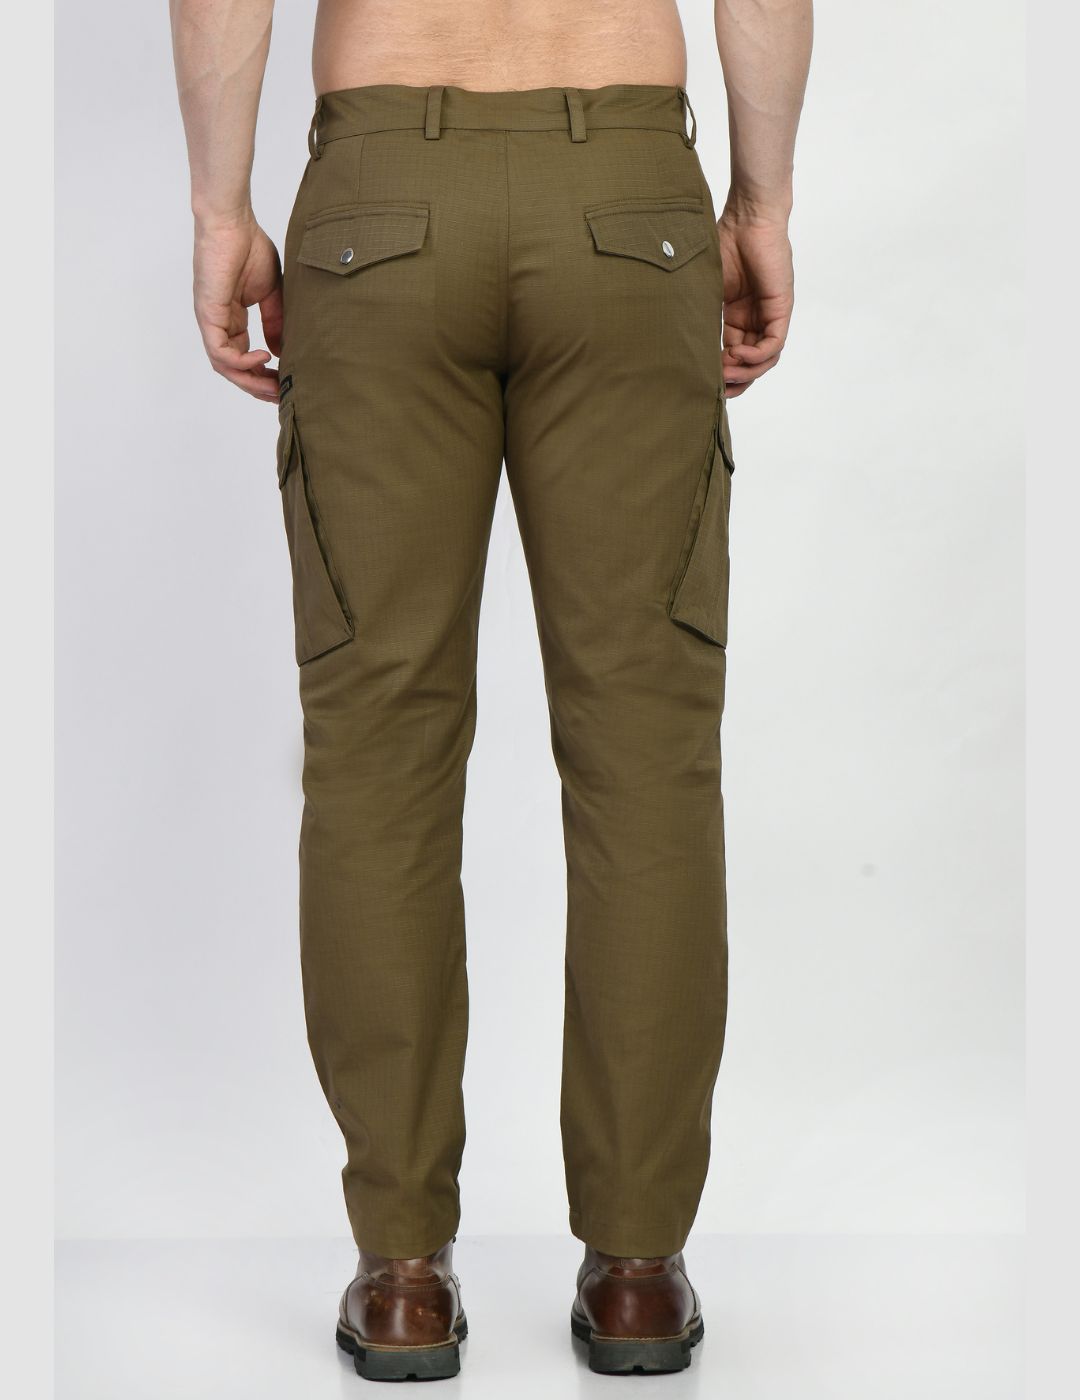 Buy BLACK CINCHEY POCKET TOOLING CARGO PANT for Women Online in India